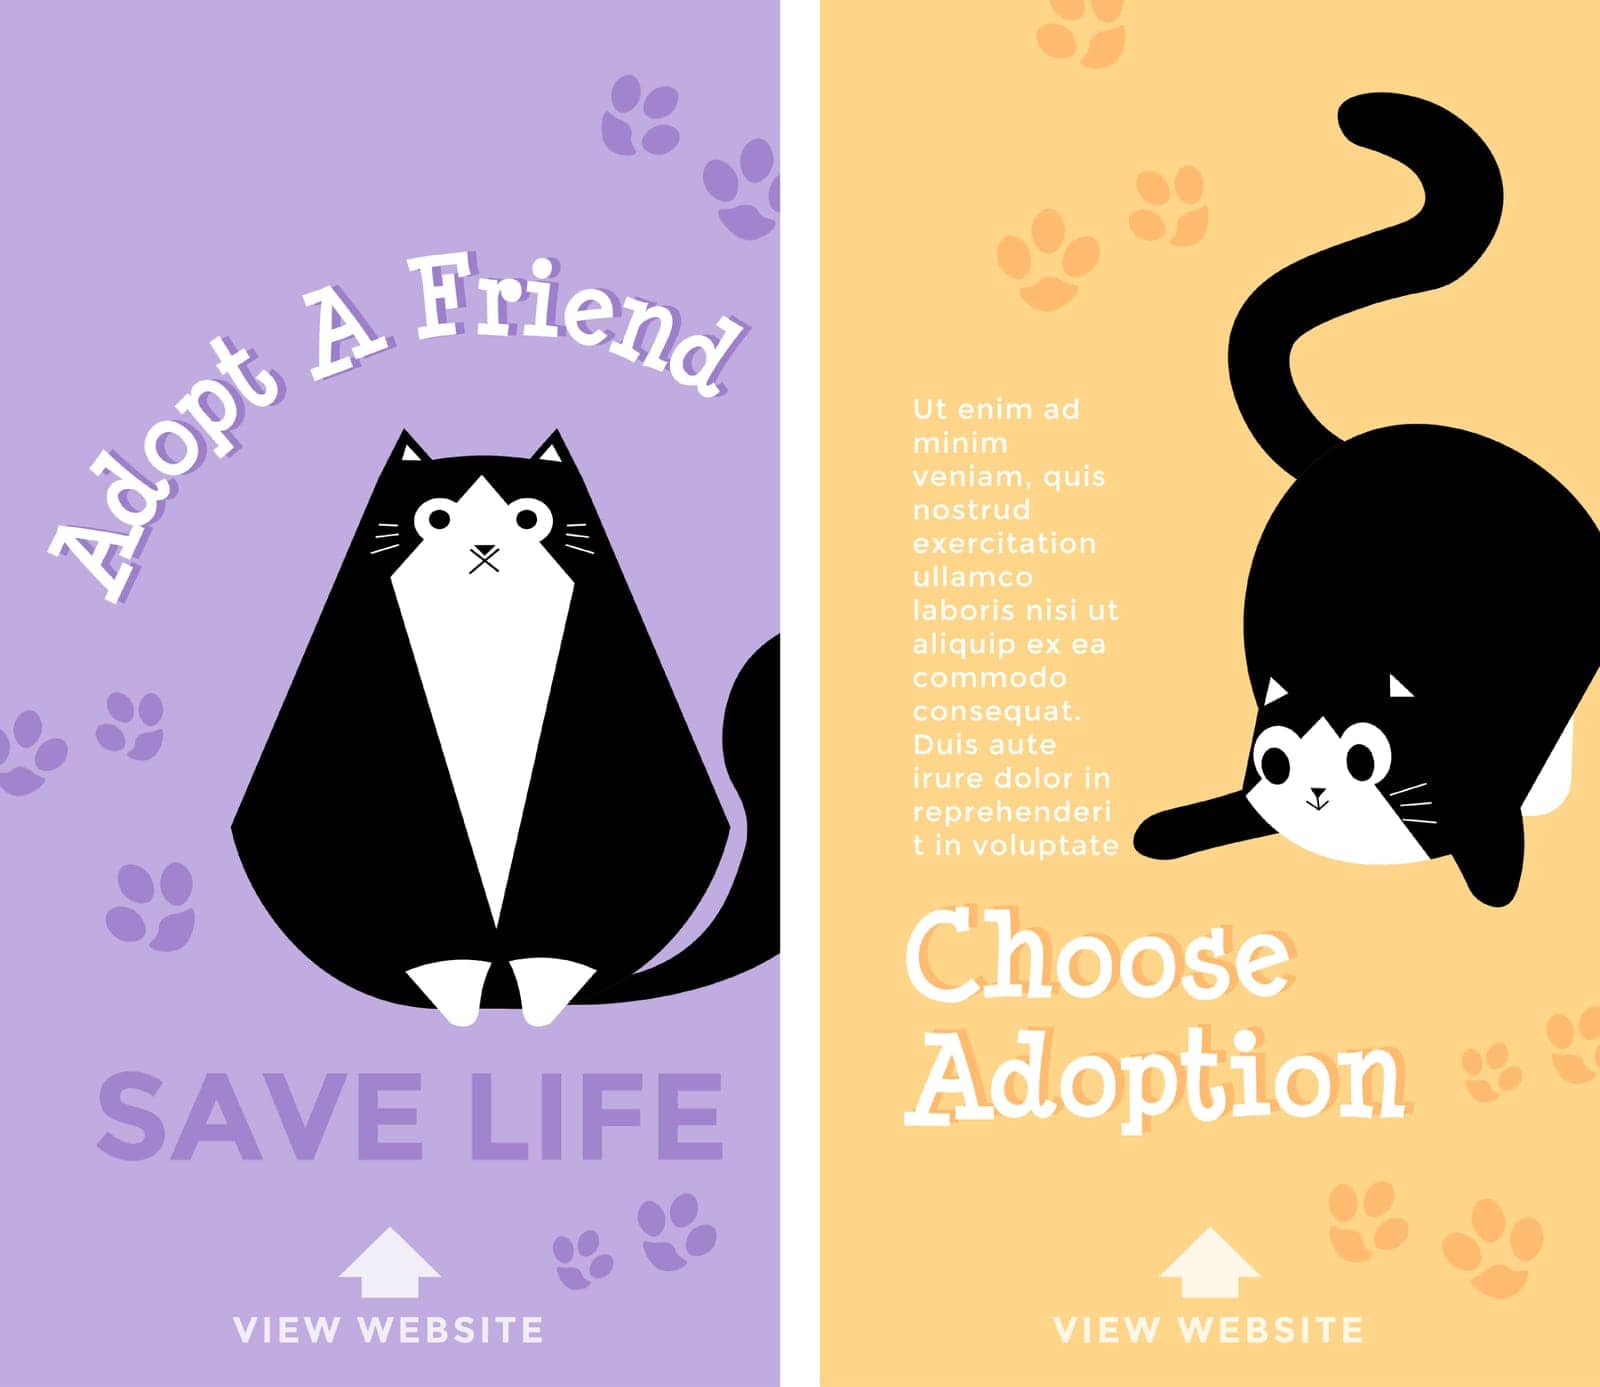 Adopt friend and save life, choose adoption banner by Sonulkaster